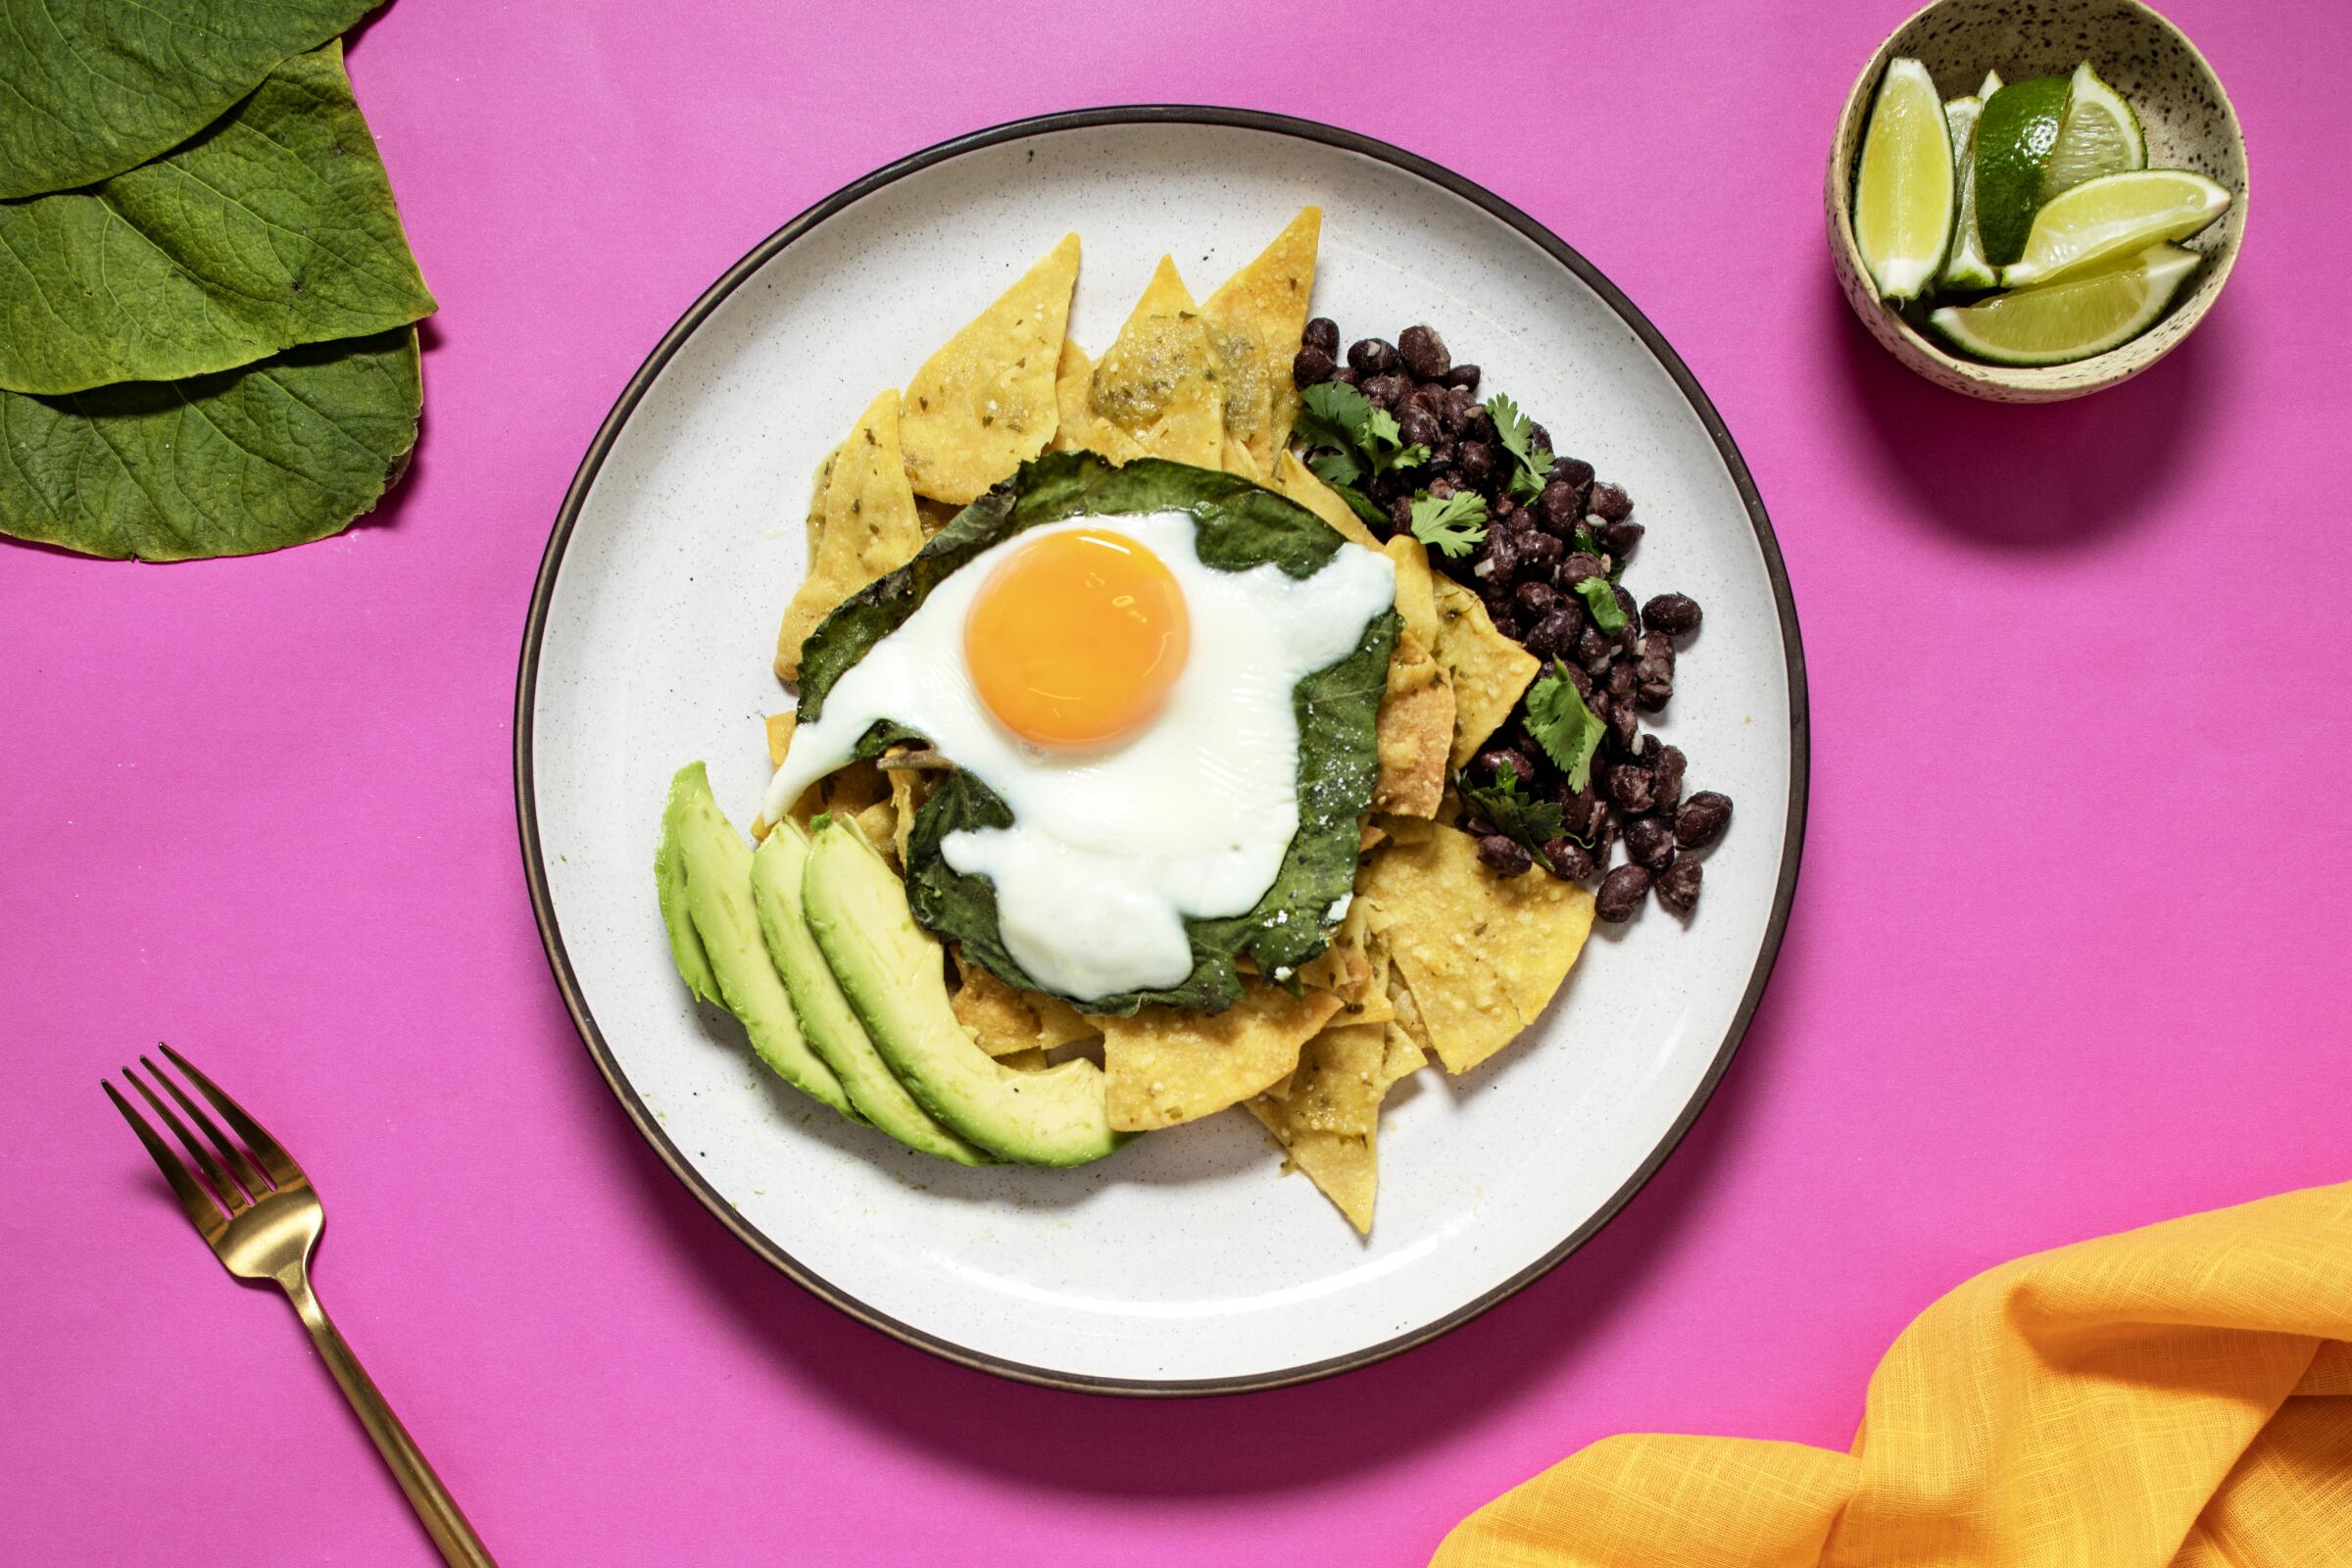 A plate of eggs and avocado atop a plate, against a pink background.